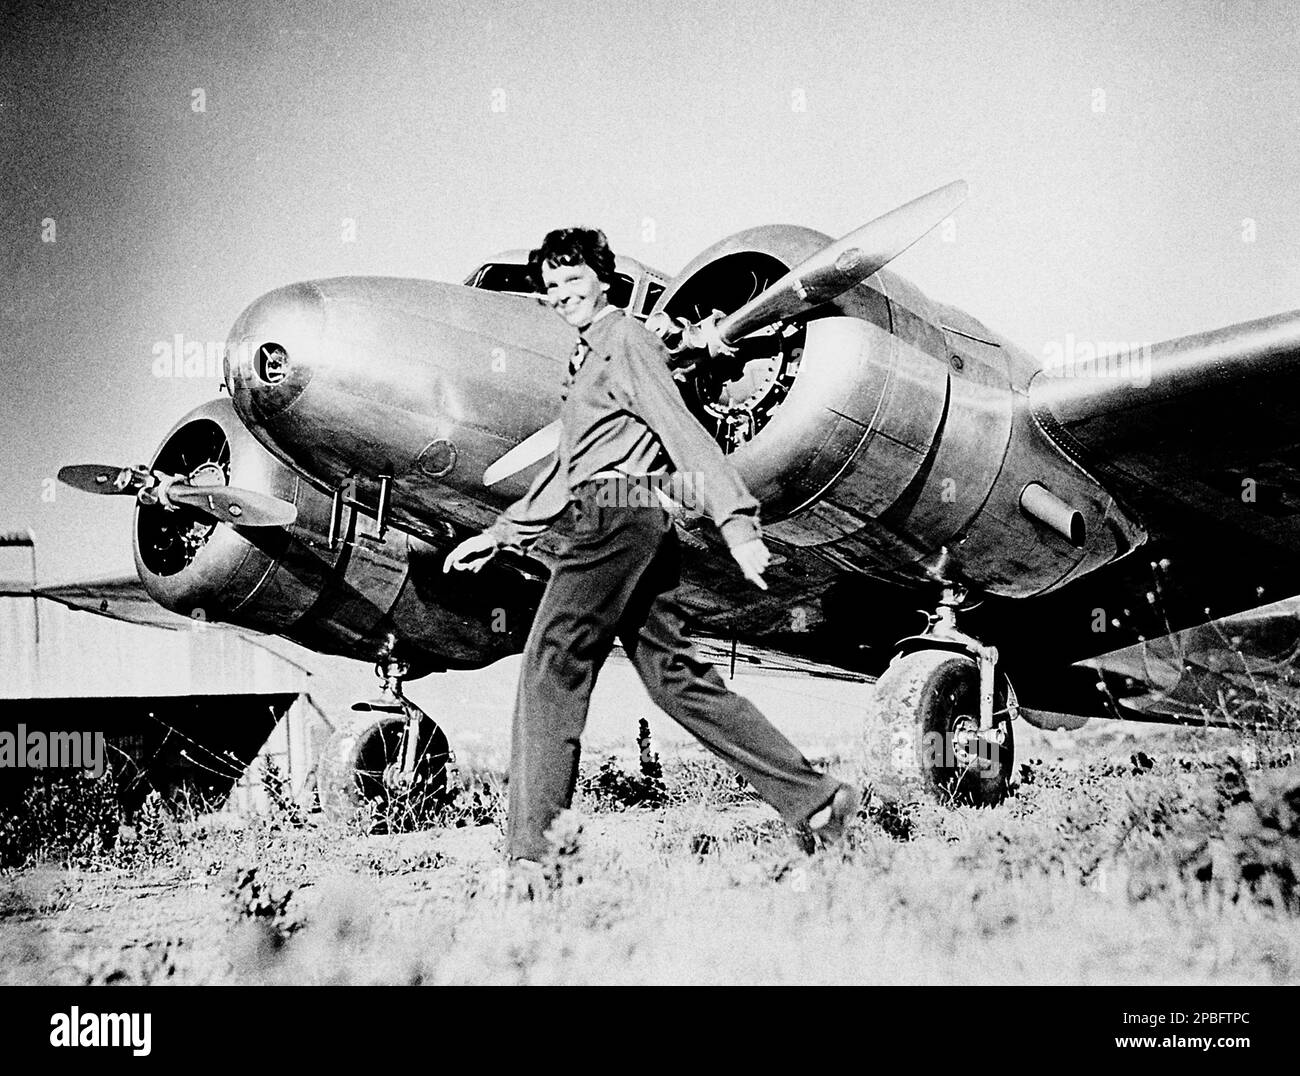 1937 ca , USA  :  Portraits of  most celebrated woman aviator AMELIA EARHART ( 1897 - 1937 ) and Lockheed L-10E Electra NR 16020  . Earhart was the first woman to receive the Distinguished Flying Cross which she was awarded as the first aviatrix to fly solo across the Atlantic Ocean.  She set many other records, wrote best-selling books about her flying experiences, and was instrumental in the formation of The Ninety-Nines, an organization for female pilots.  During an attempt to make a circumnavigational flight of the globe in 1937, Earhart disappeared over the central Pacific Ocean near Howl Stock Photo